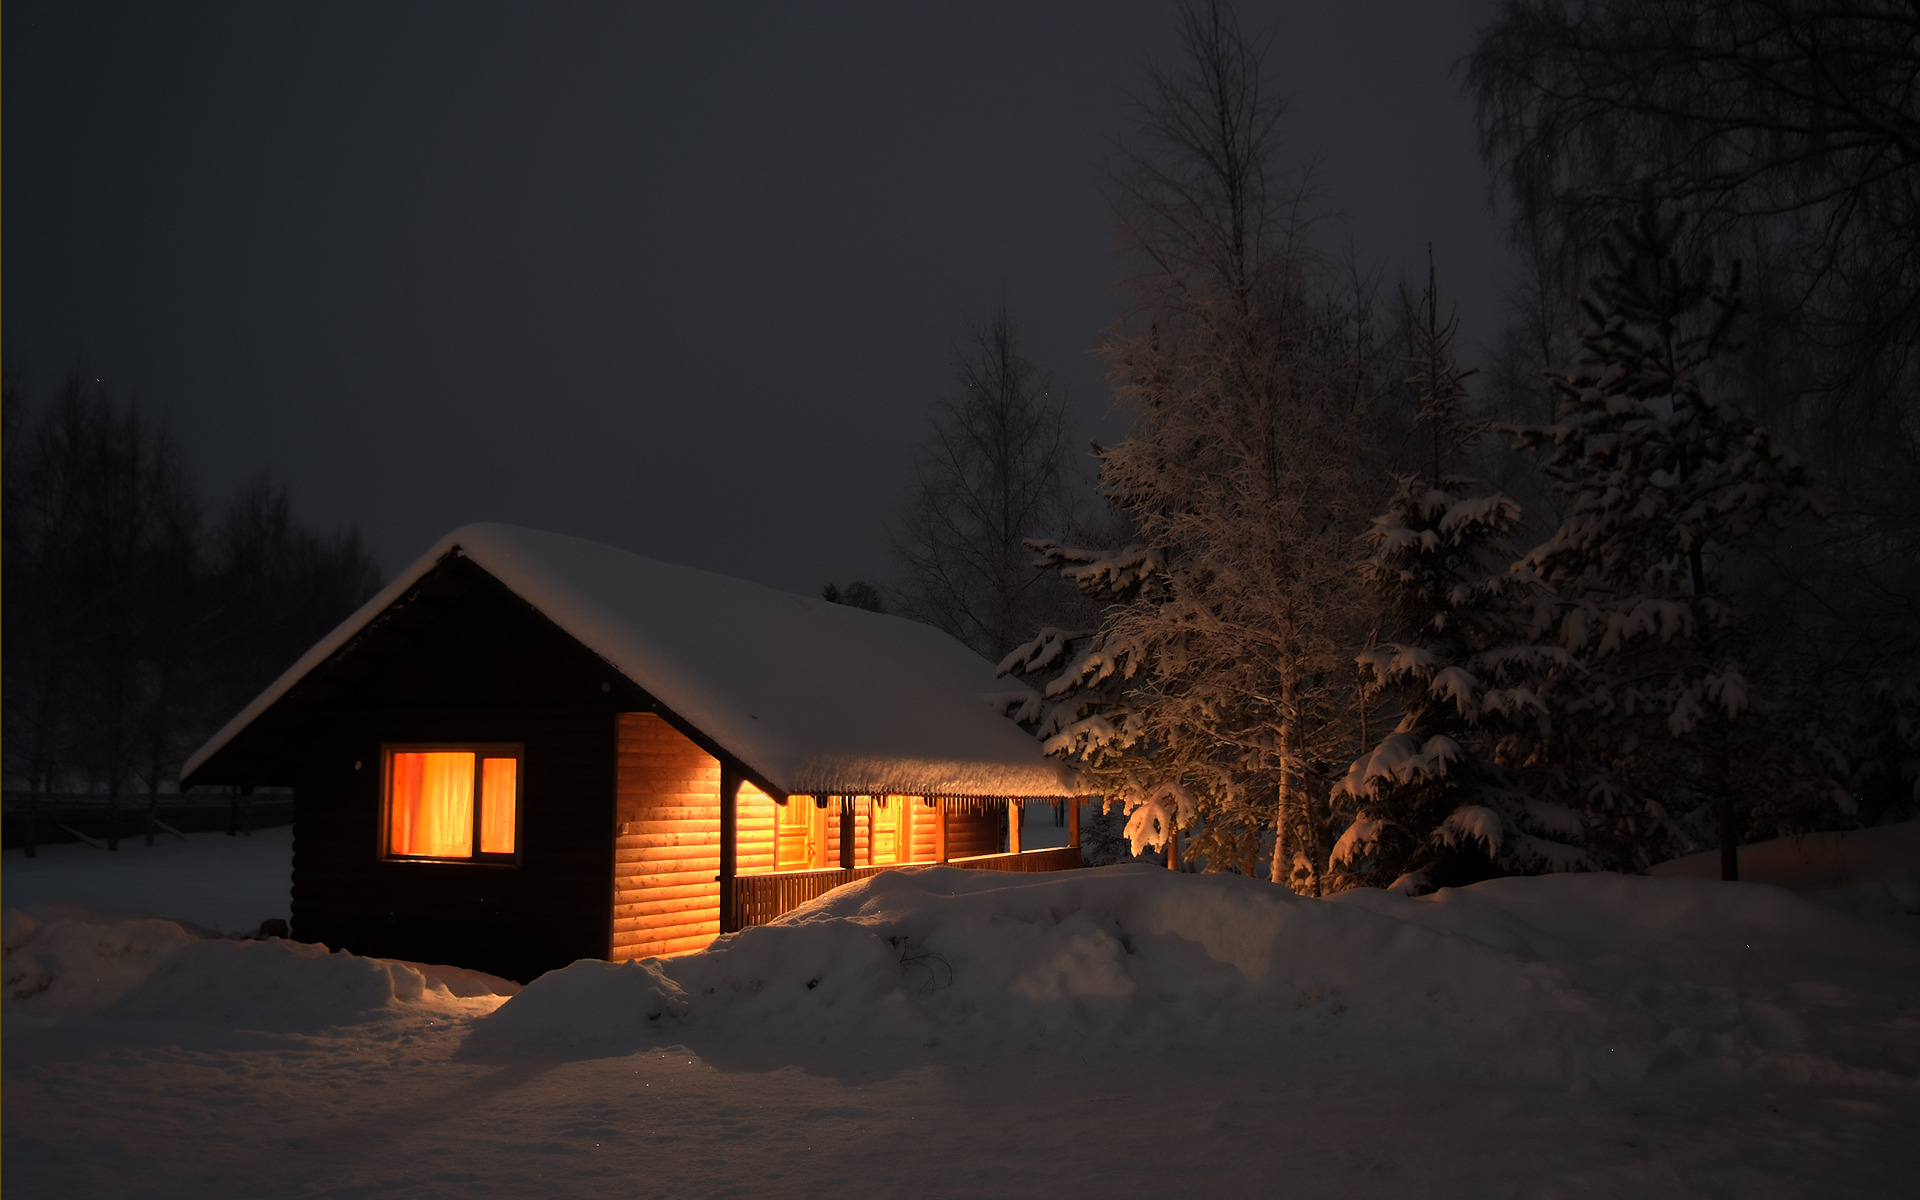 Snow On Cabin In Woods Wallpaper Background